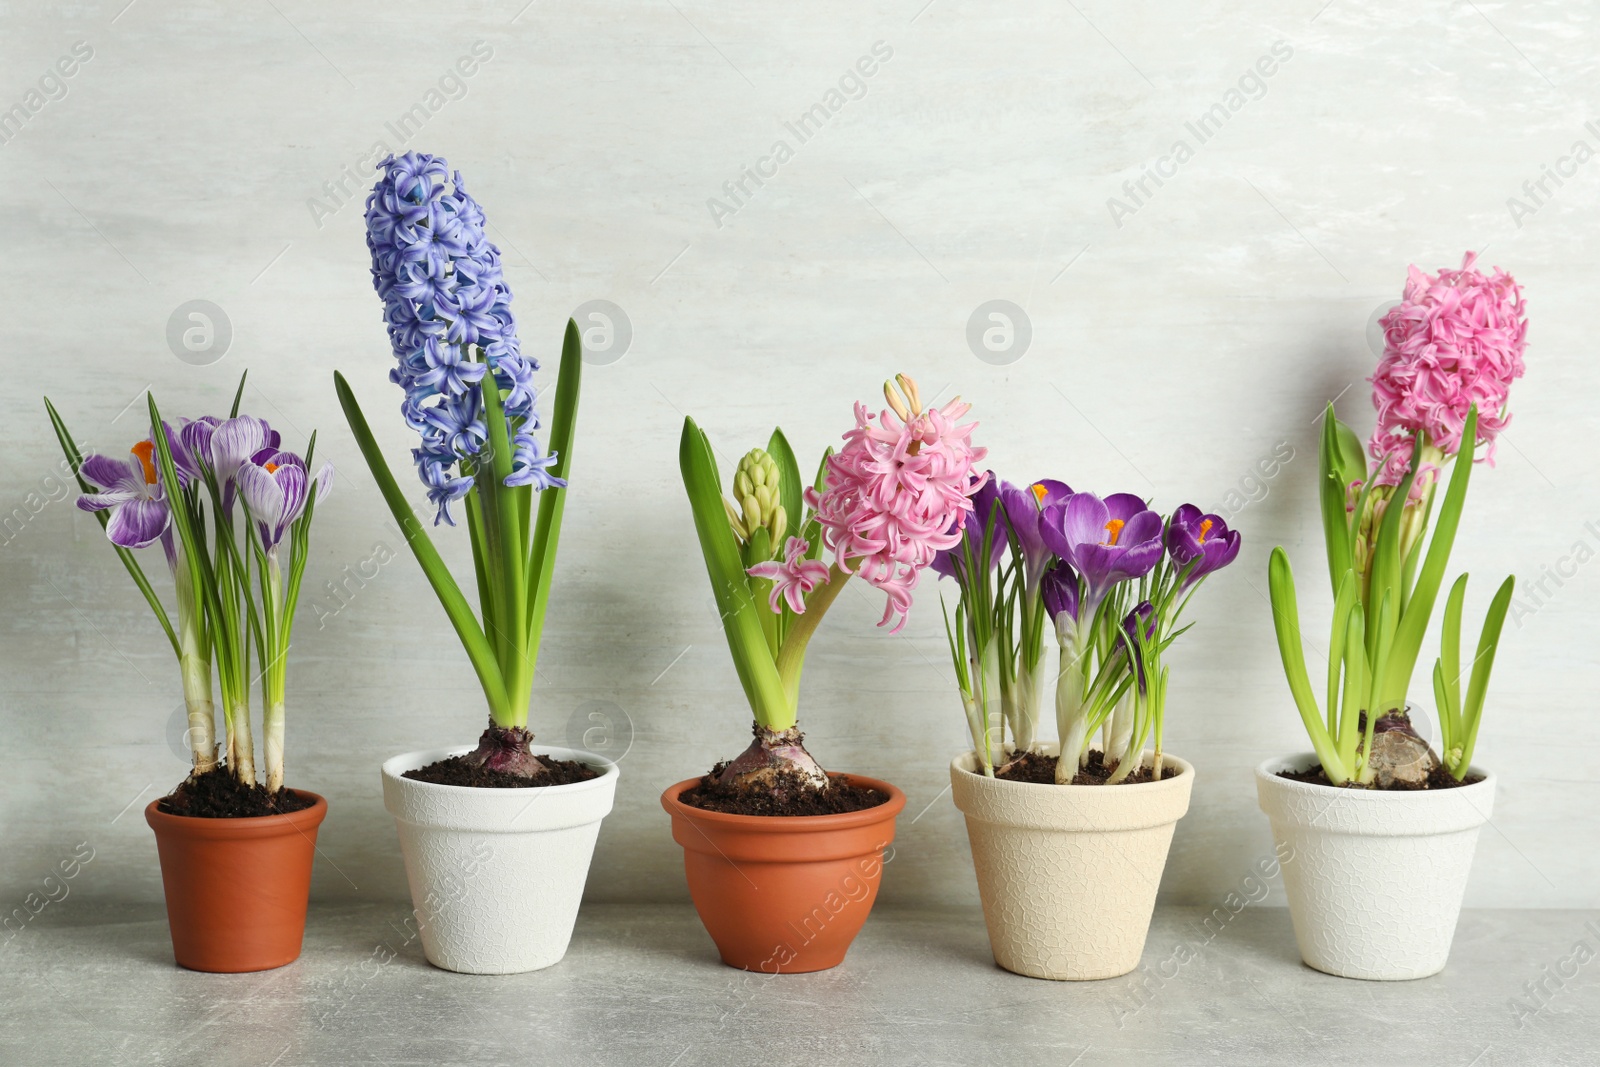 Photo of Different flowers in ceramic pots on light grey stone table